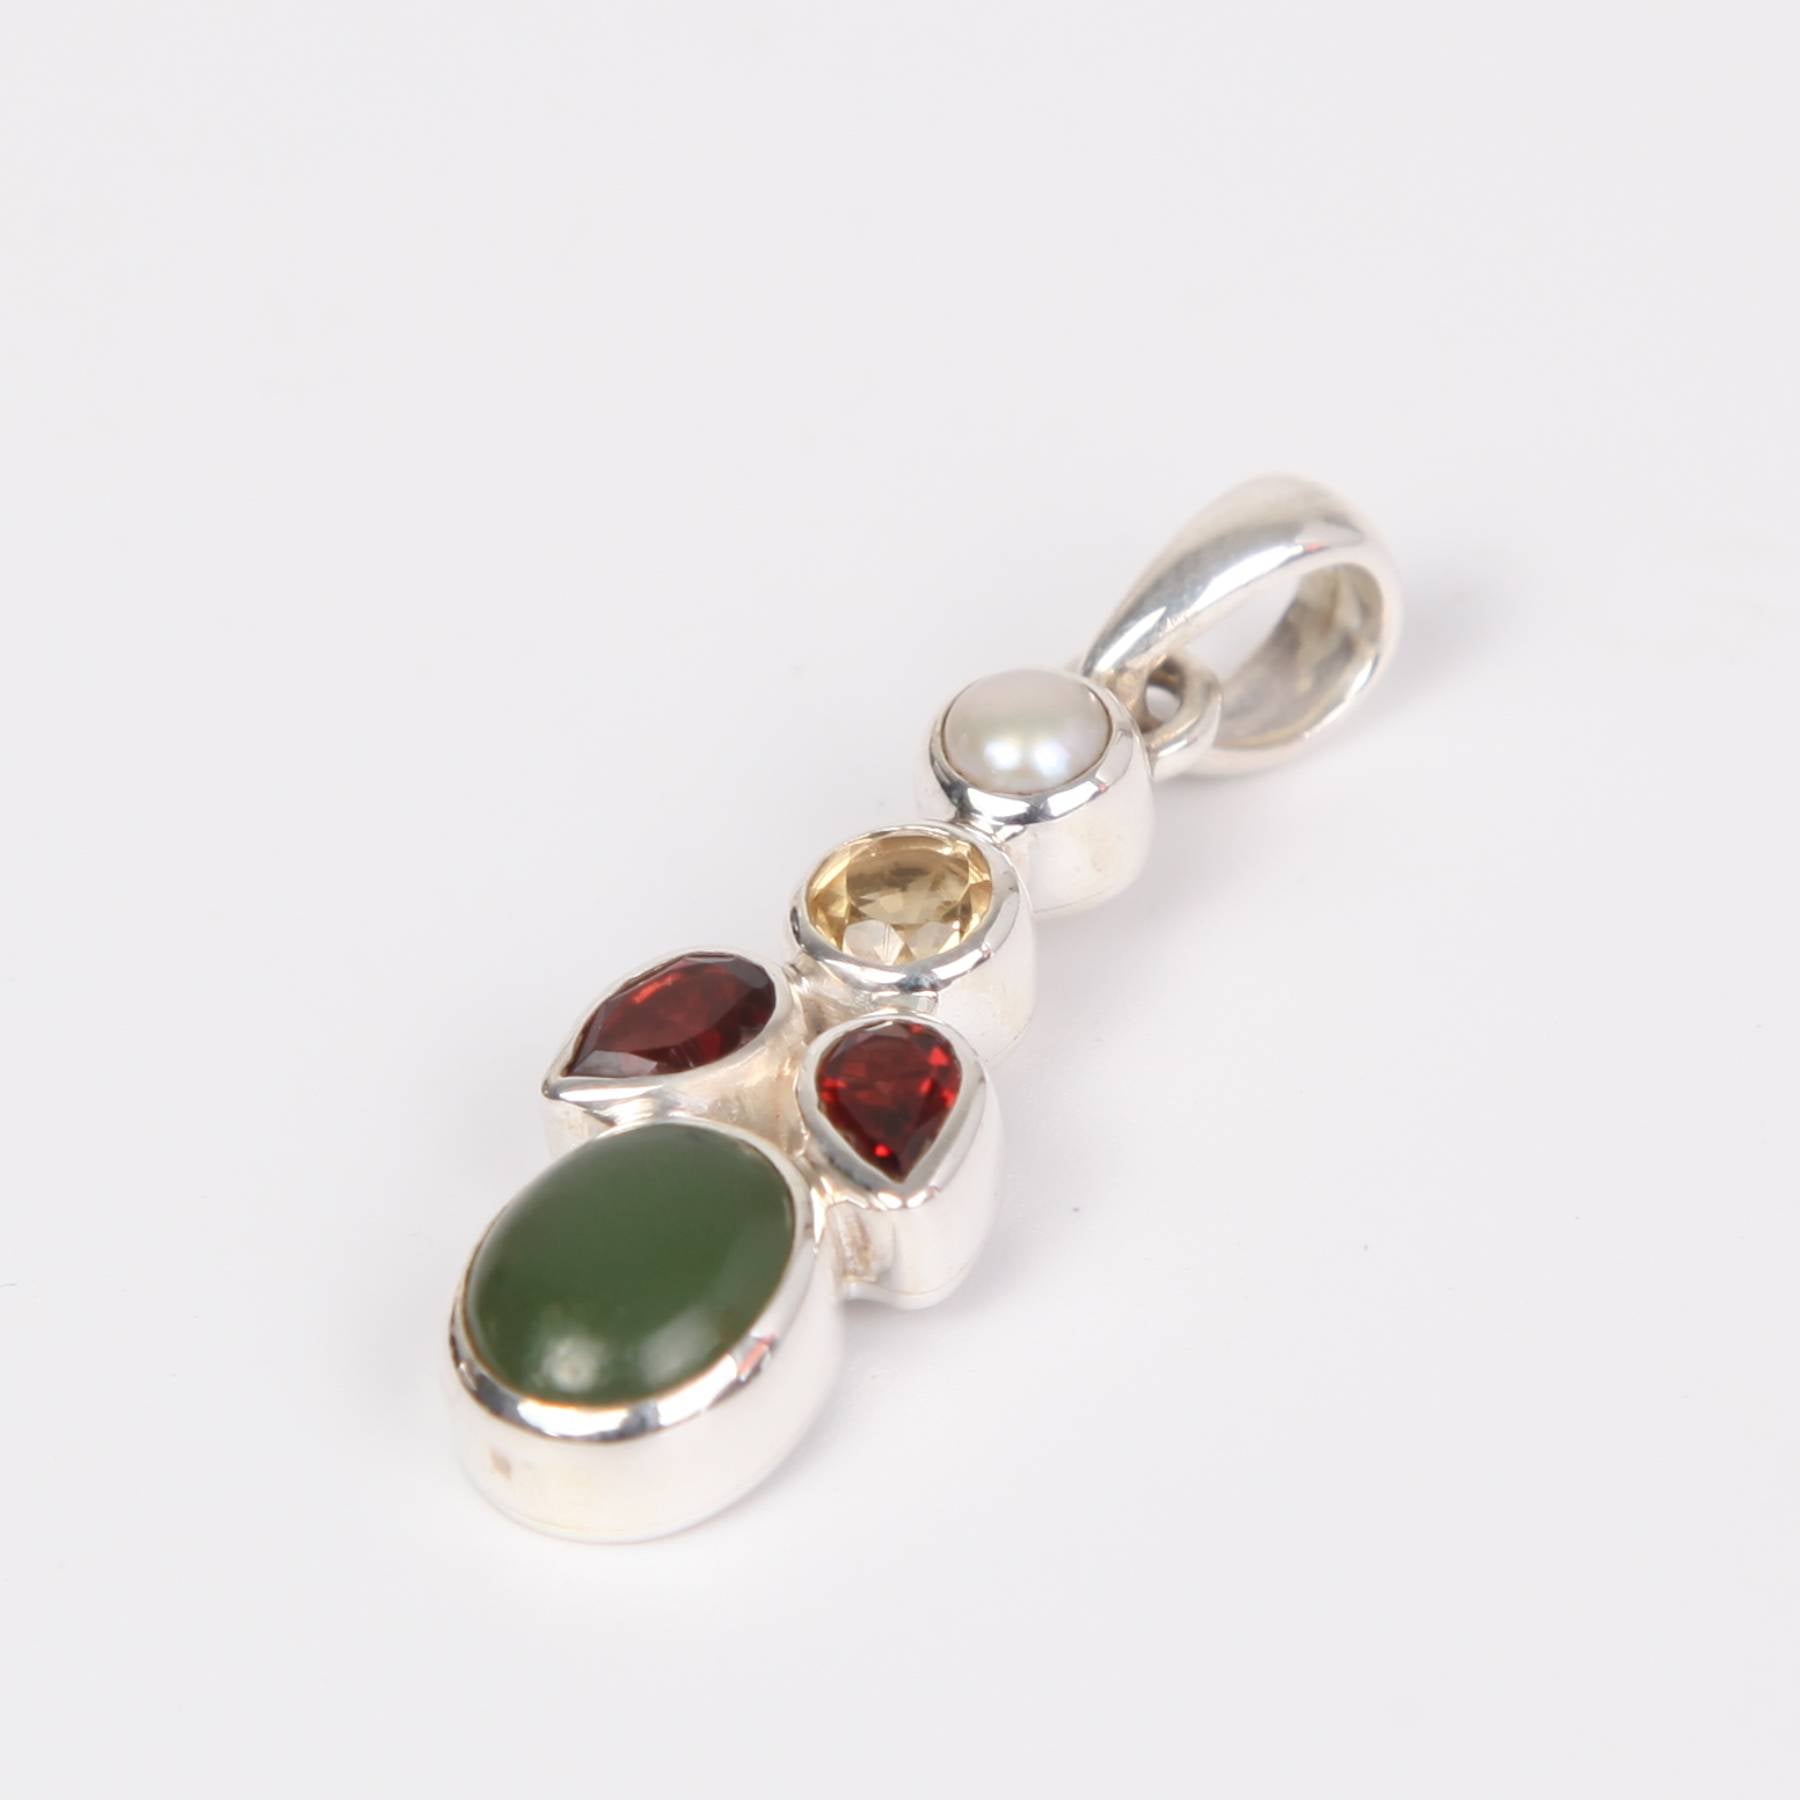 Nephrite Sterling Silver Pendant with Garnet, Citrine and Fresh Water Pearl